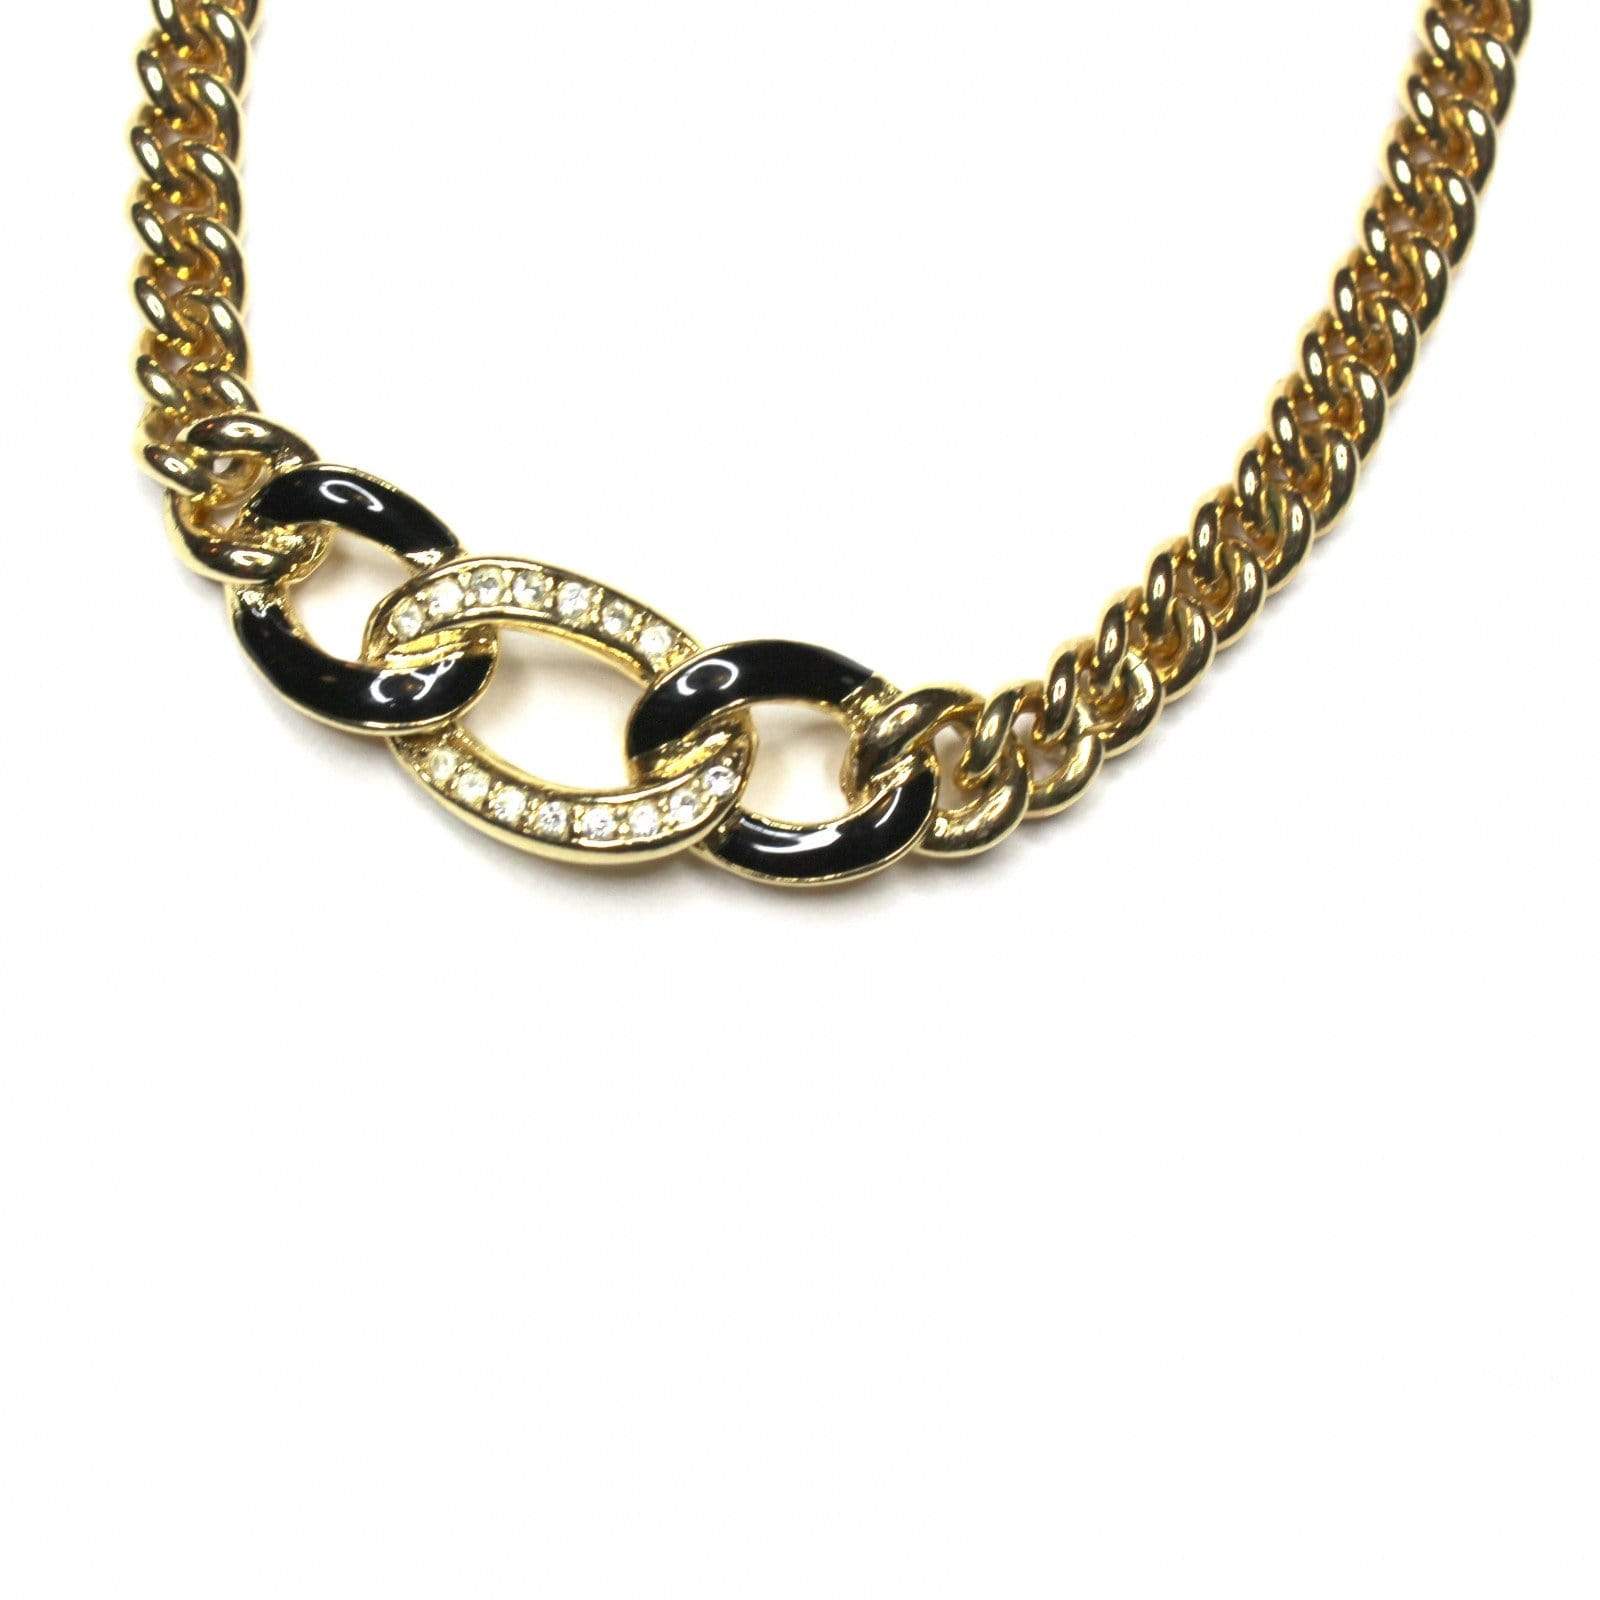 Gold Dior Necklace with Black Enamel and Crystal Accents RSTKD Vintage